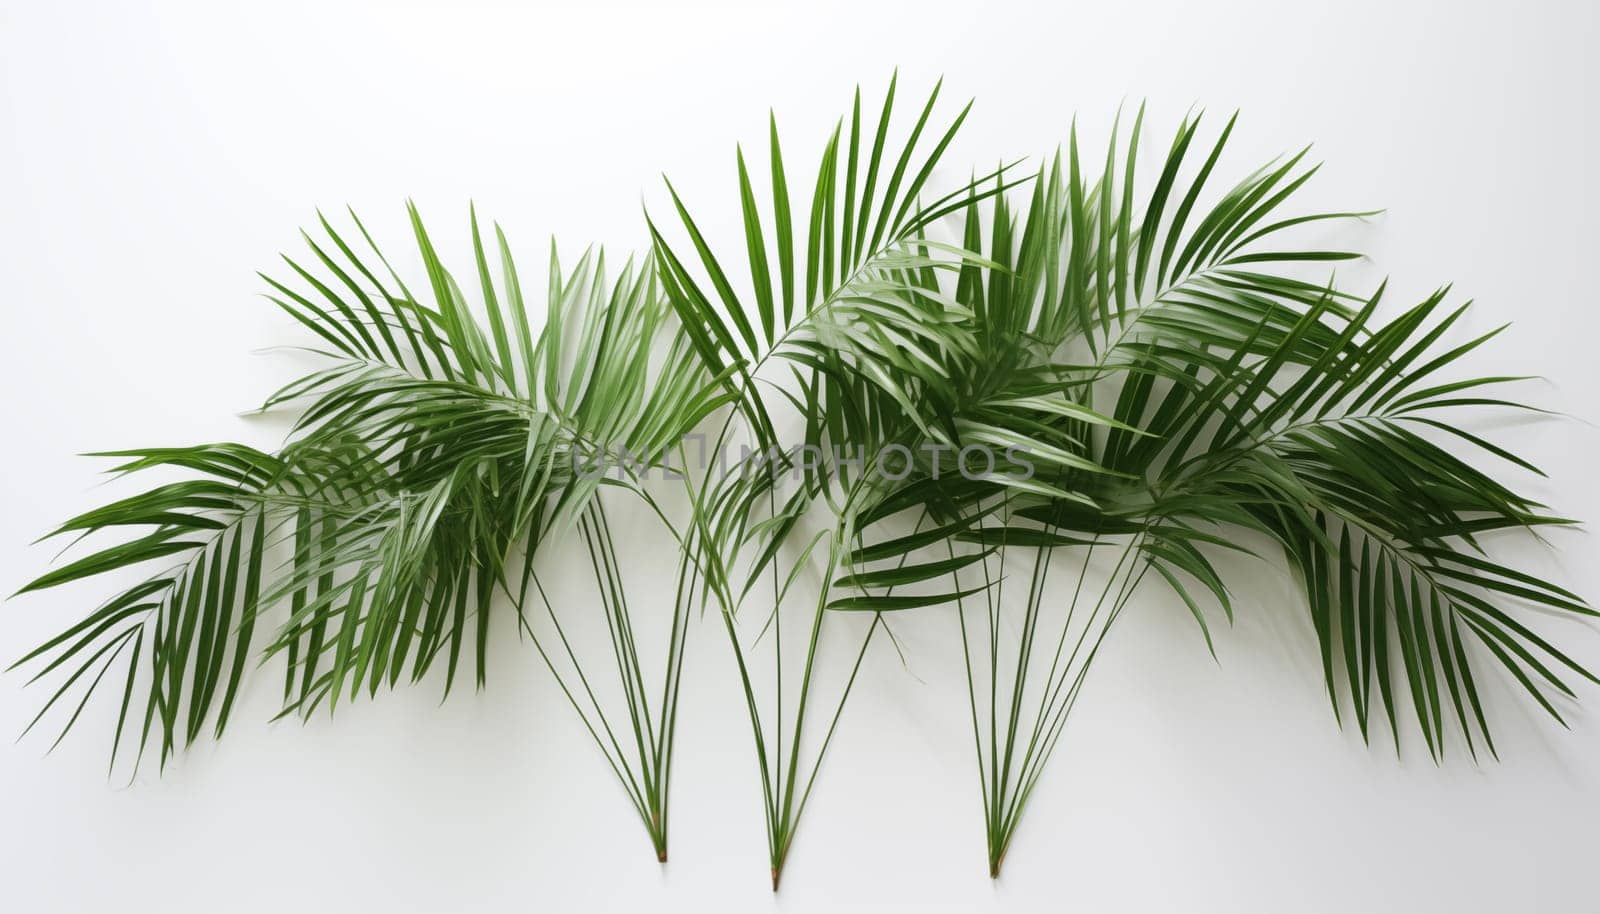 Bamboo Palm leaves on white background, isolated by Nadtochiy